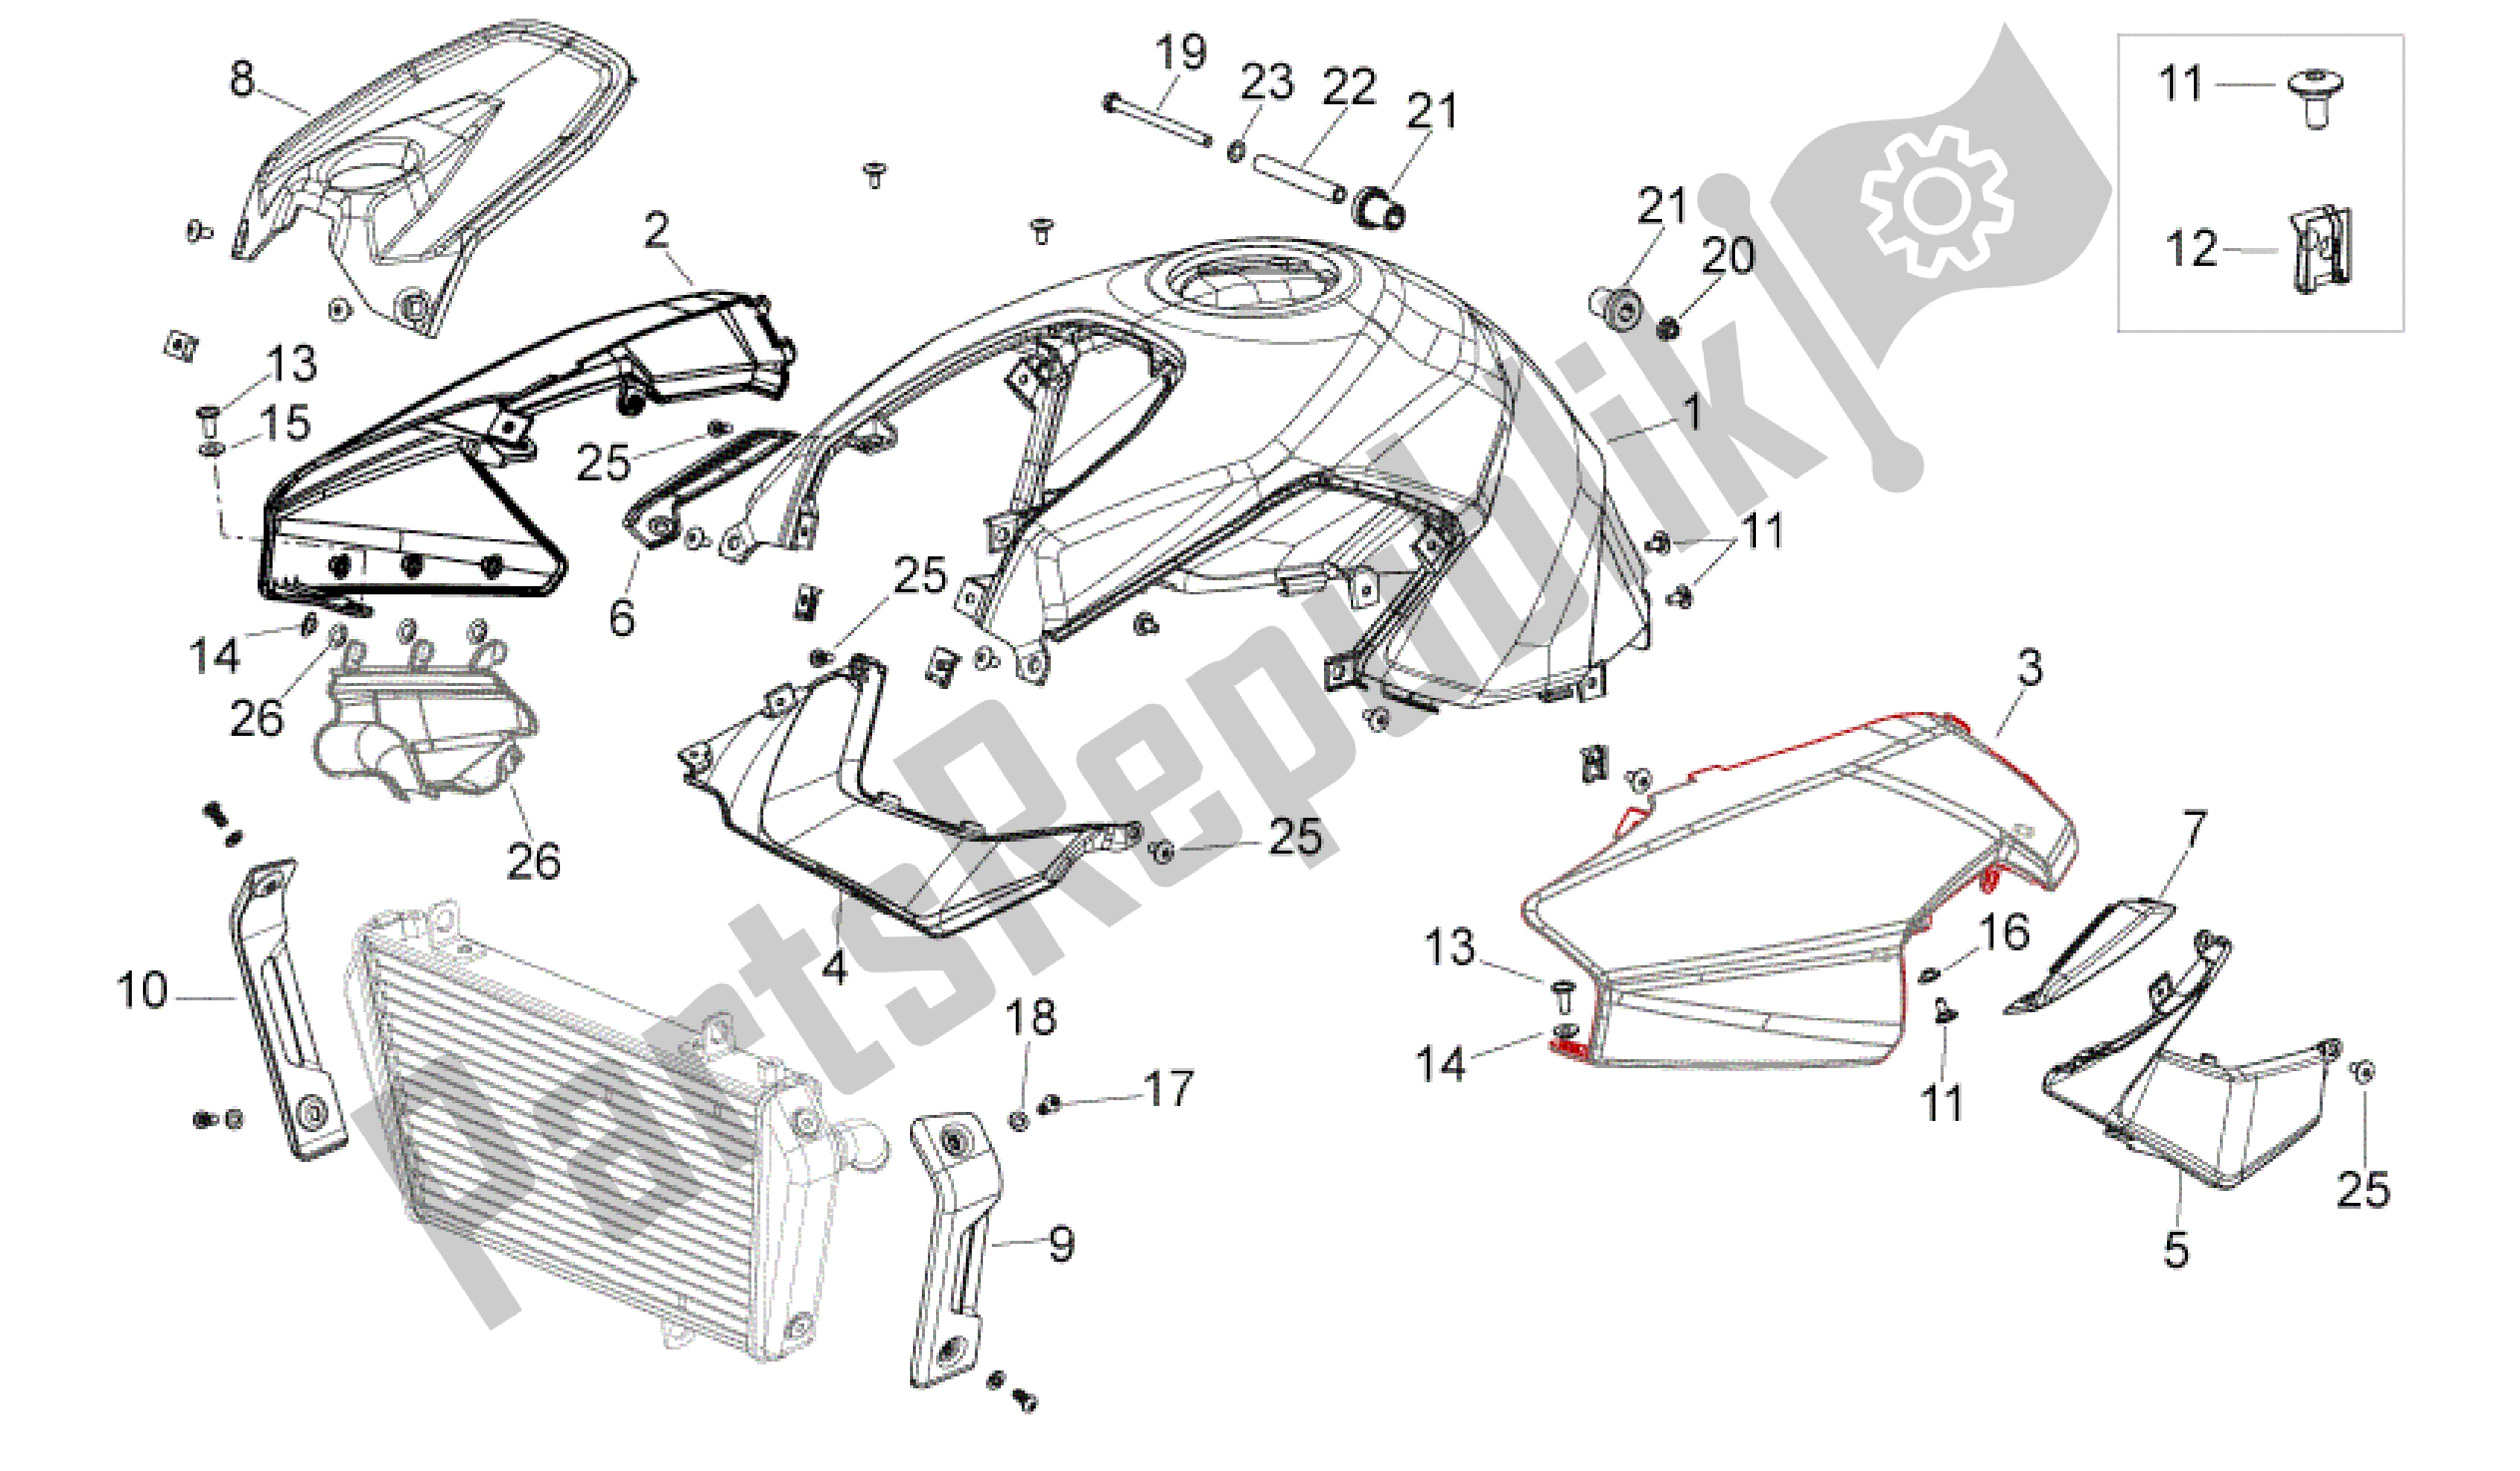 All parts for the Central Body of the Aprilia Shiver 750 2010 - 2013